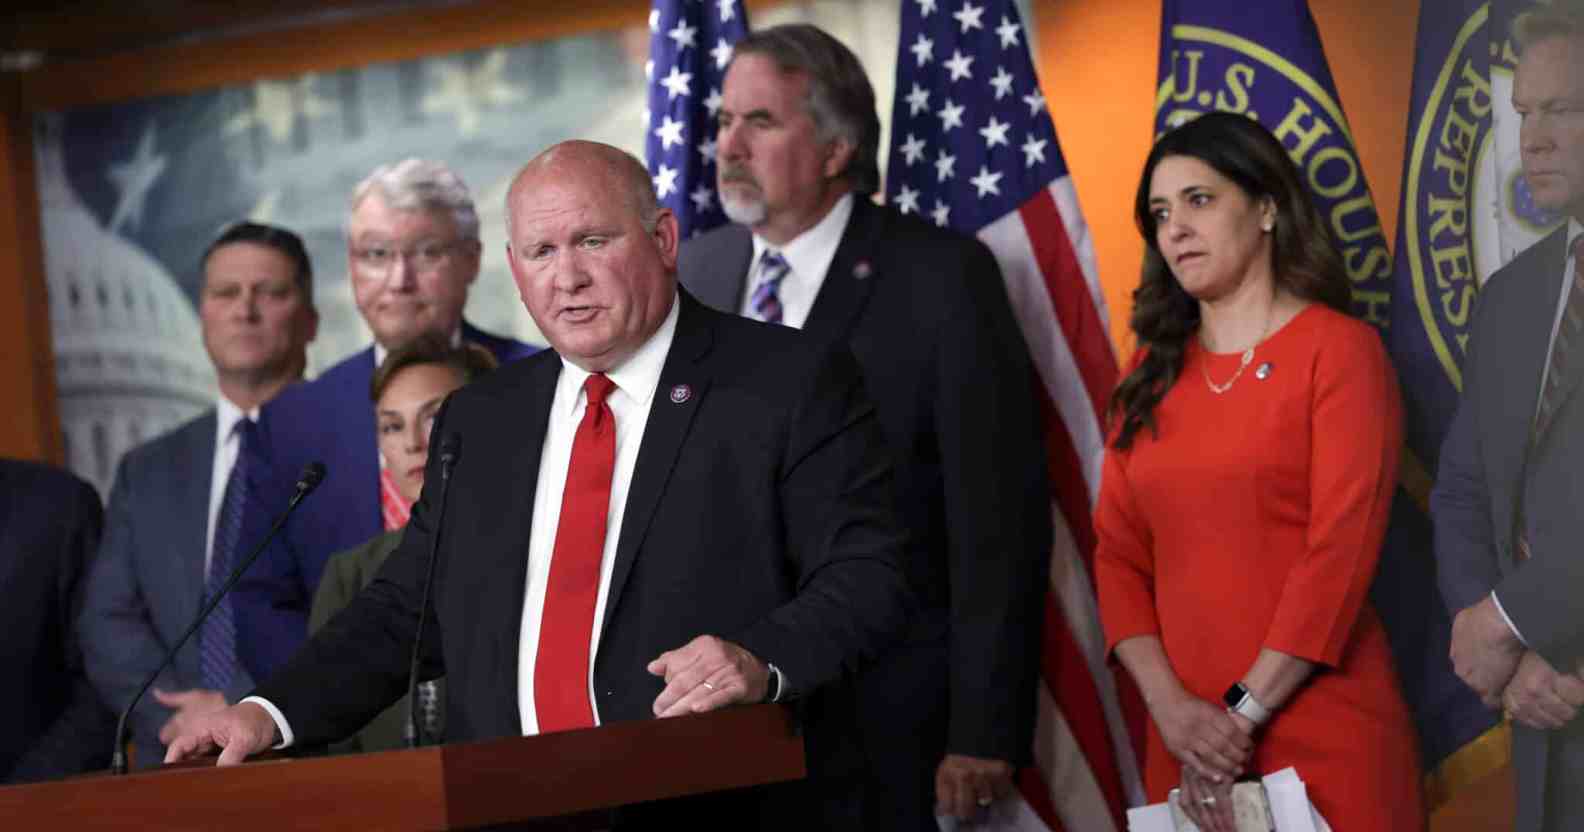 U.S. Rep. Glenn Thompson (R-PA) joined by fellow House Republicans speaks at a press conference to discuss a Republican agriculture plan, at the U.S. Capitol on June 15, 2022